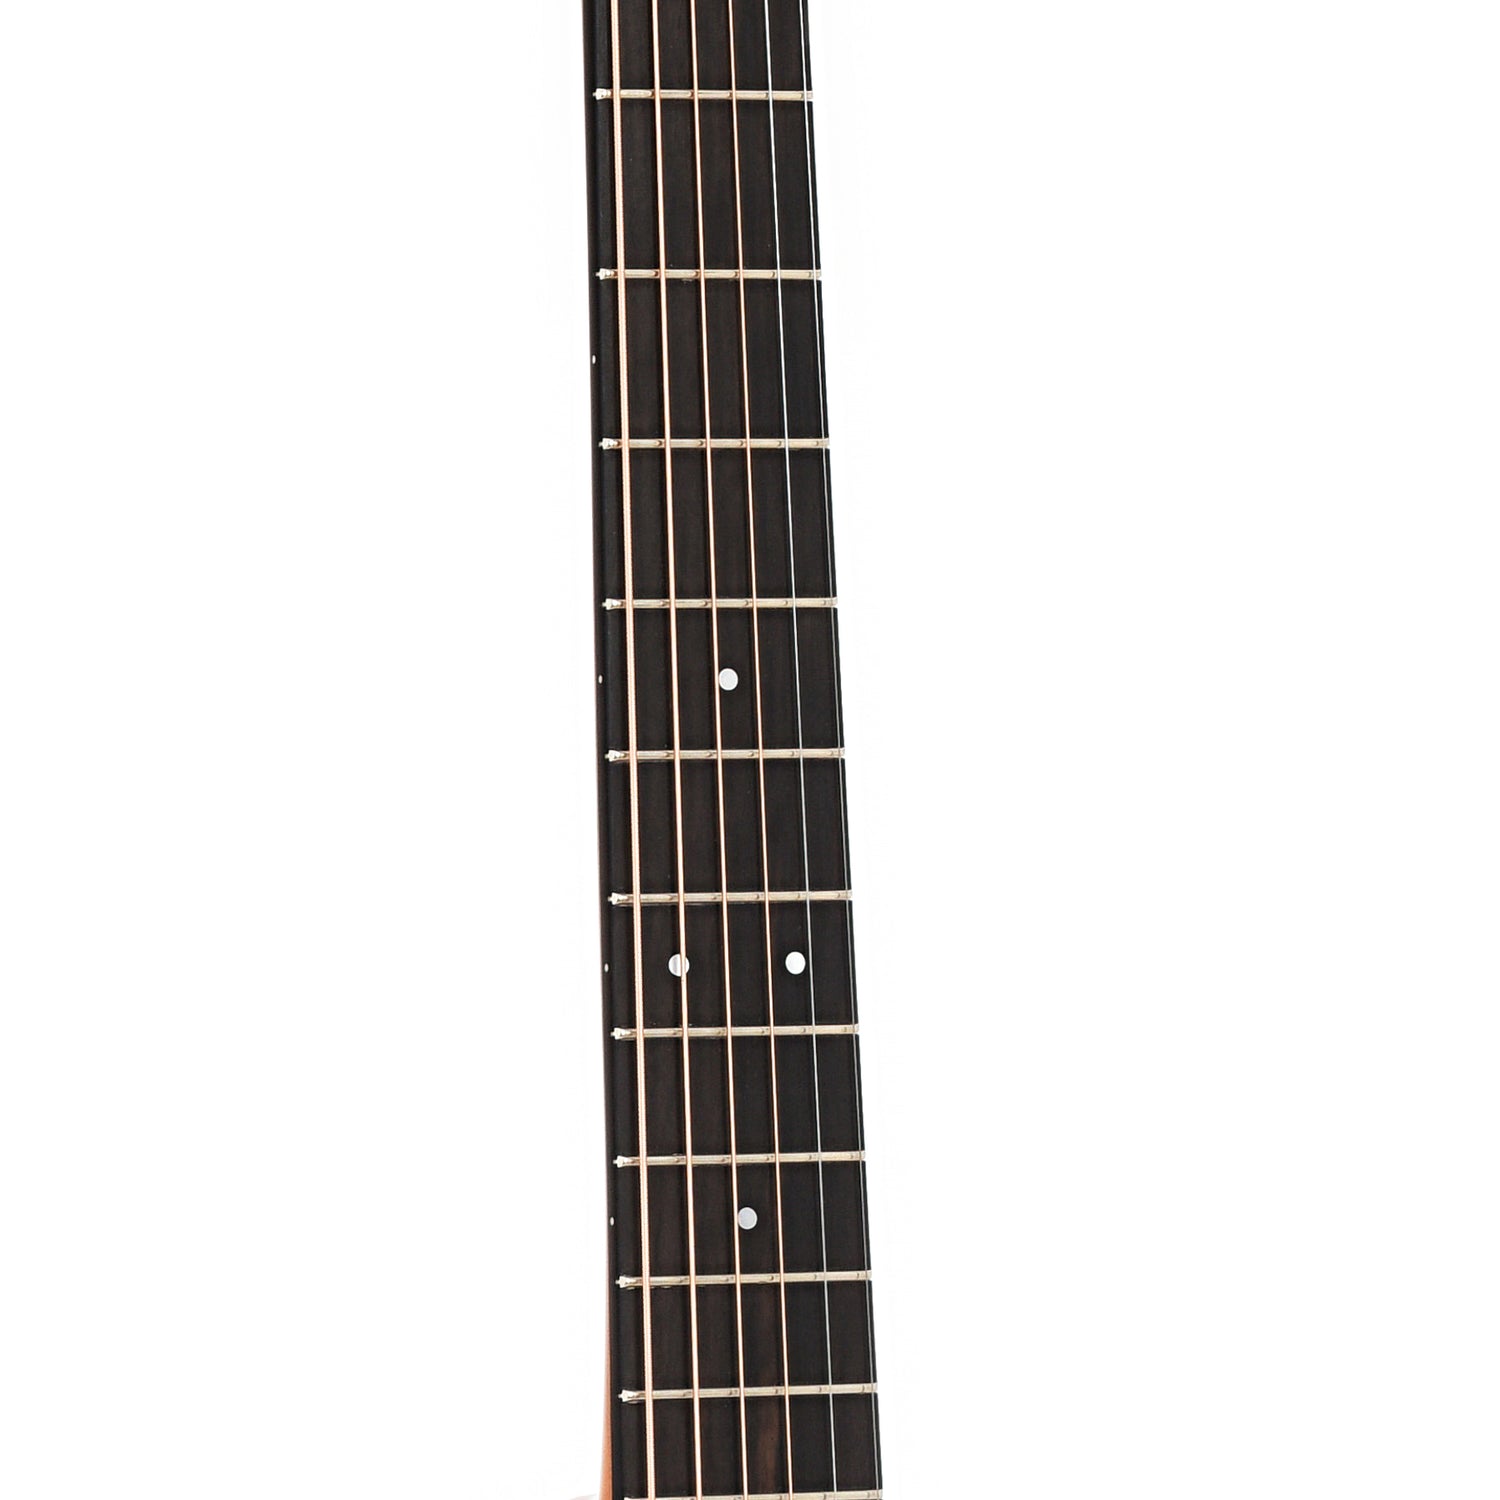 Fretboard of Gallagher Guitar Co. "The Founder's Guitar" P-50 Cherry Parlor 